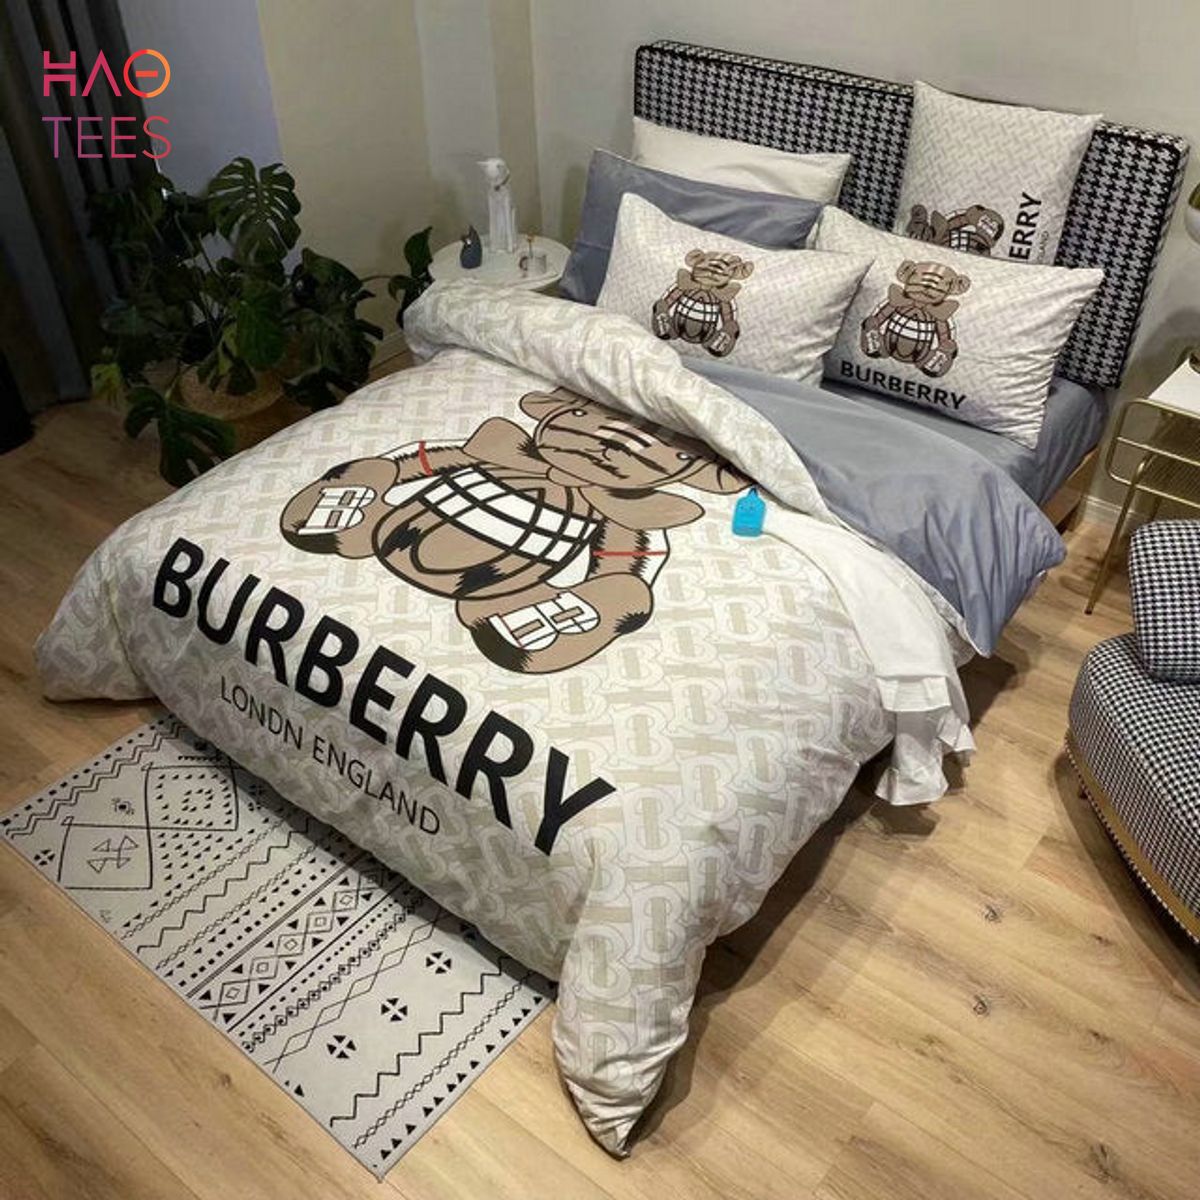 Burberry London Bedding Set Limited Edition